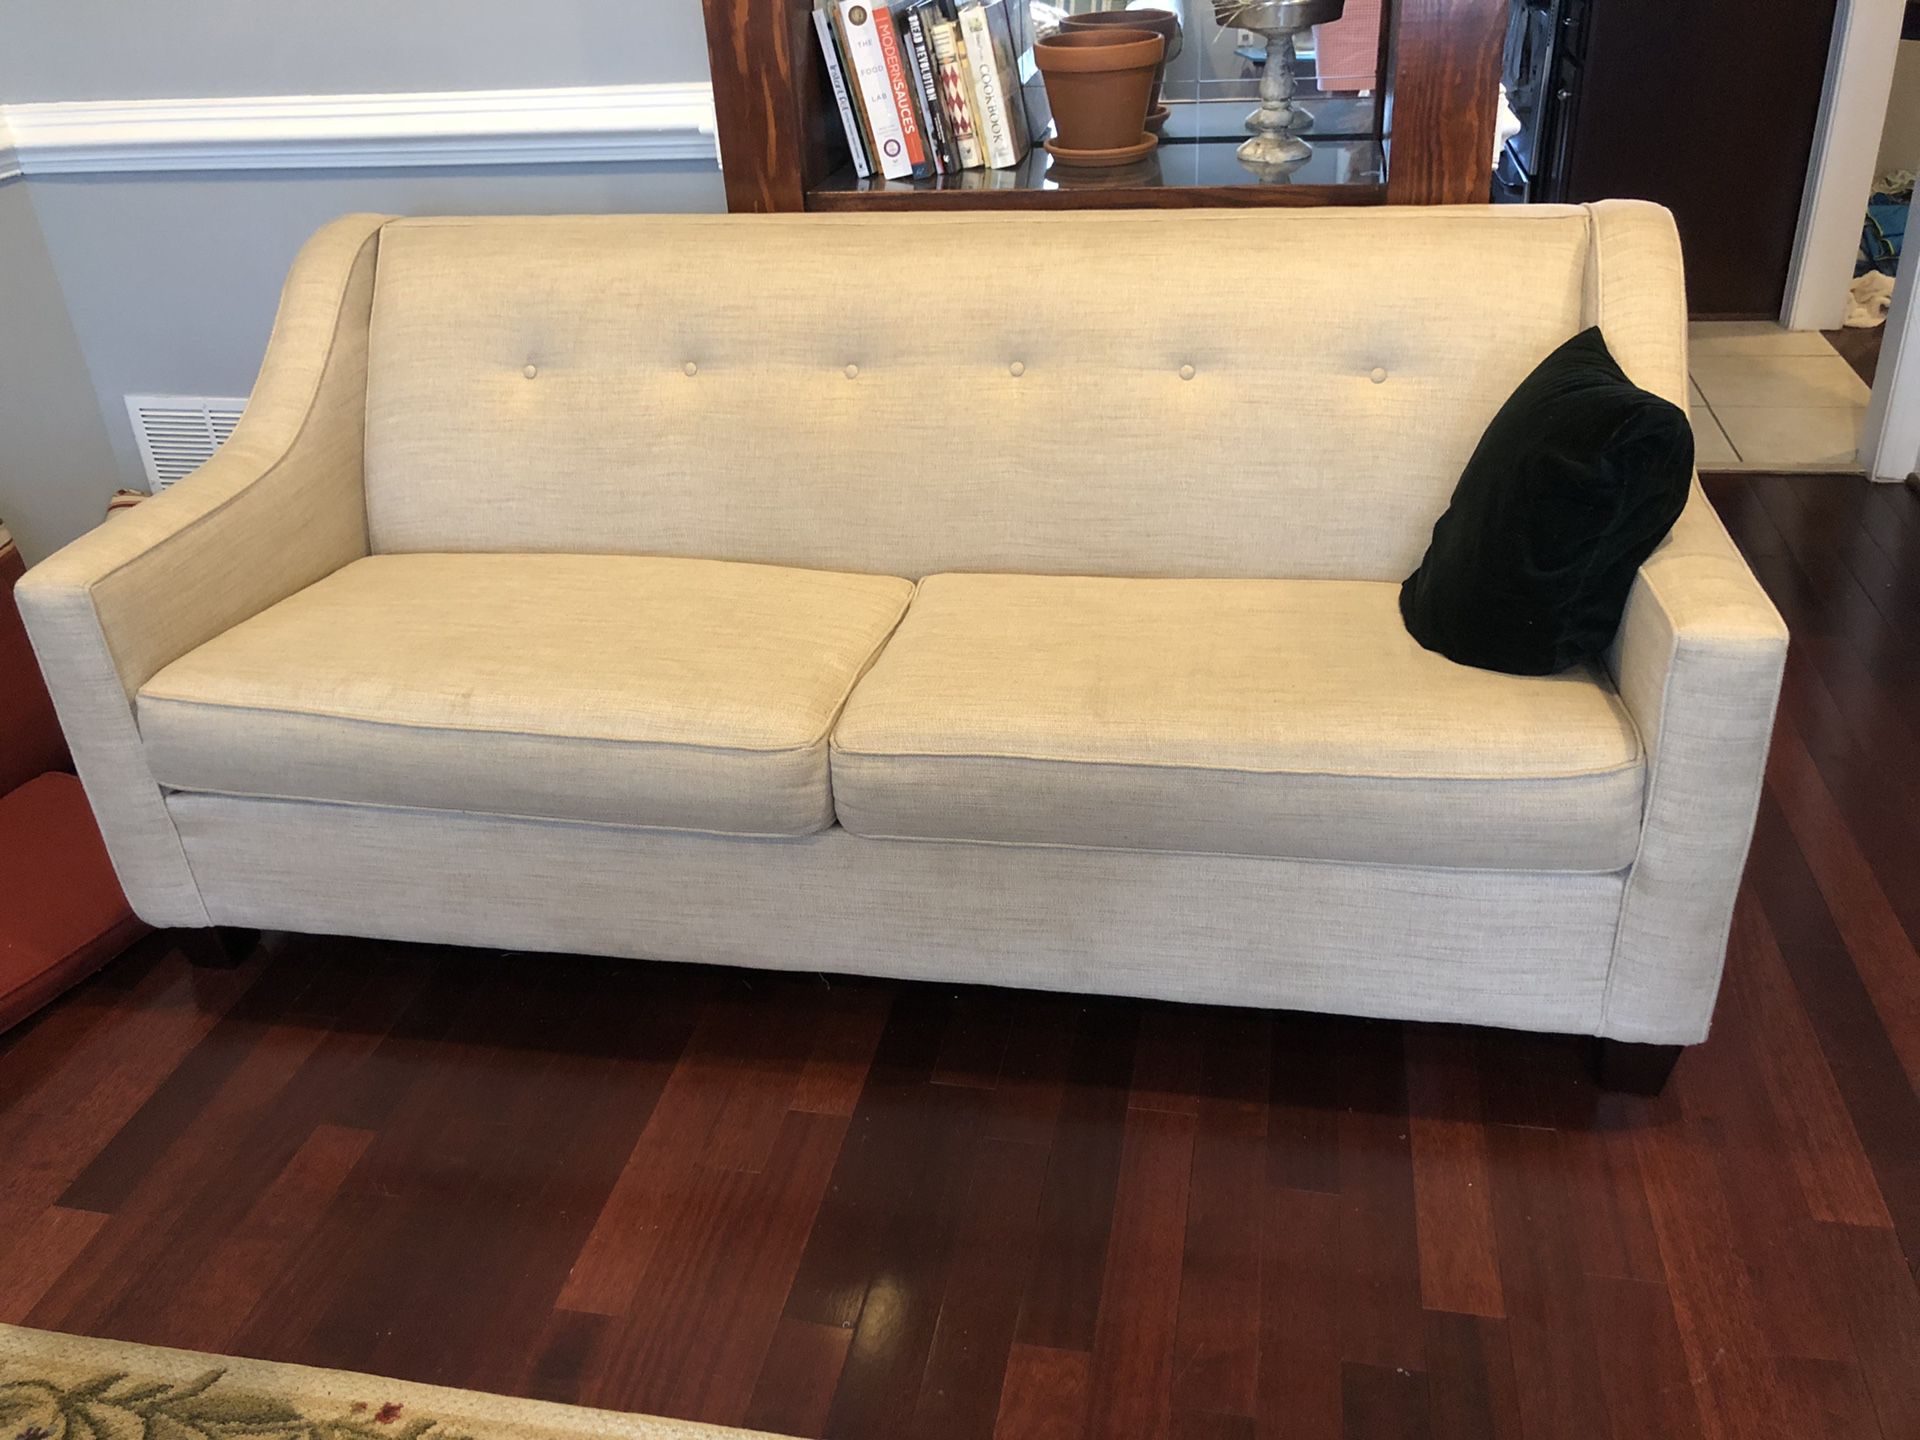 Cream sofa with full-sized pull out bed